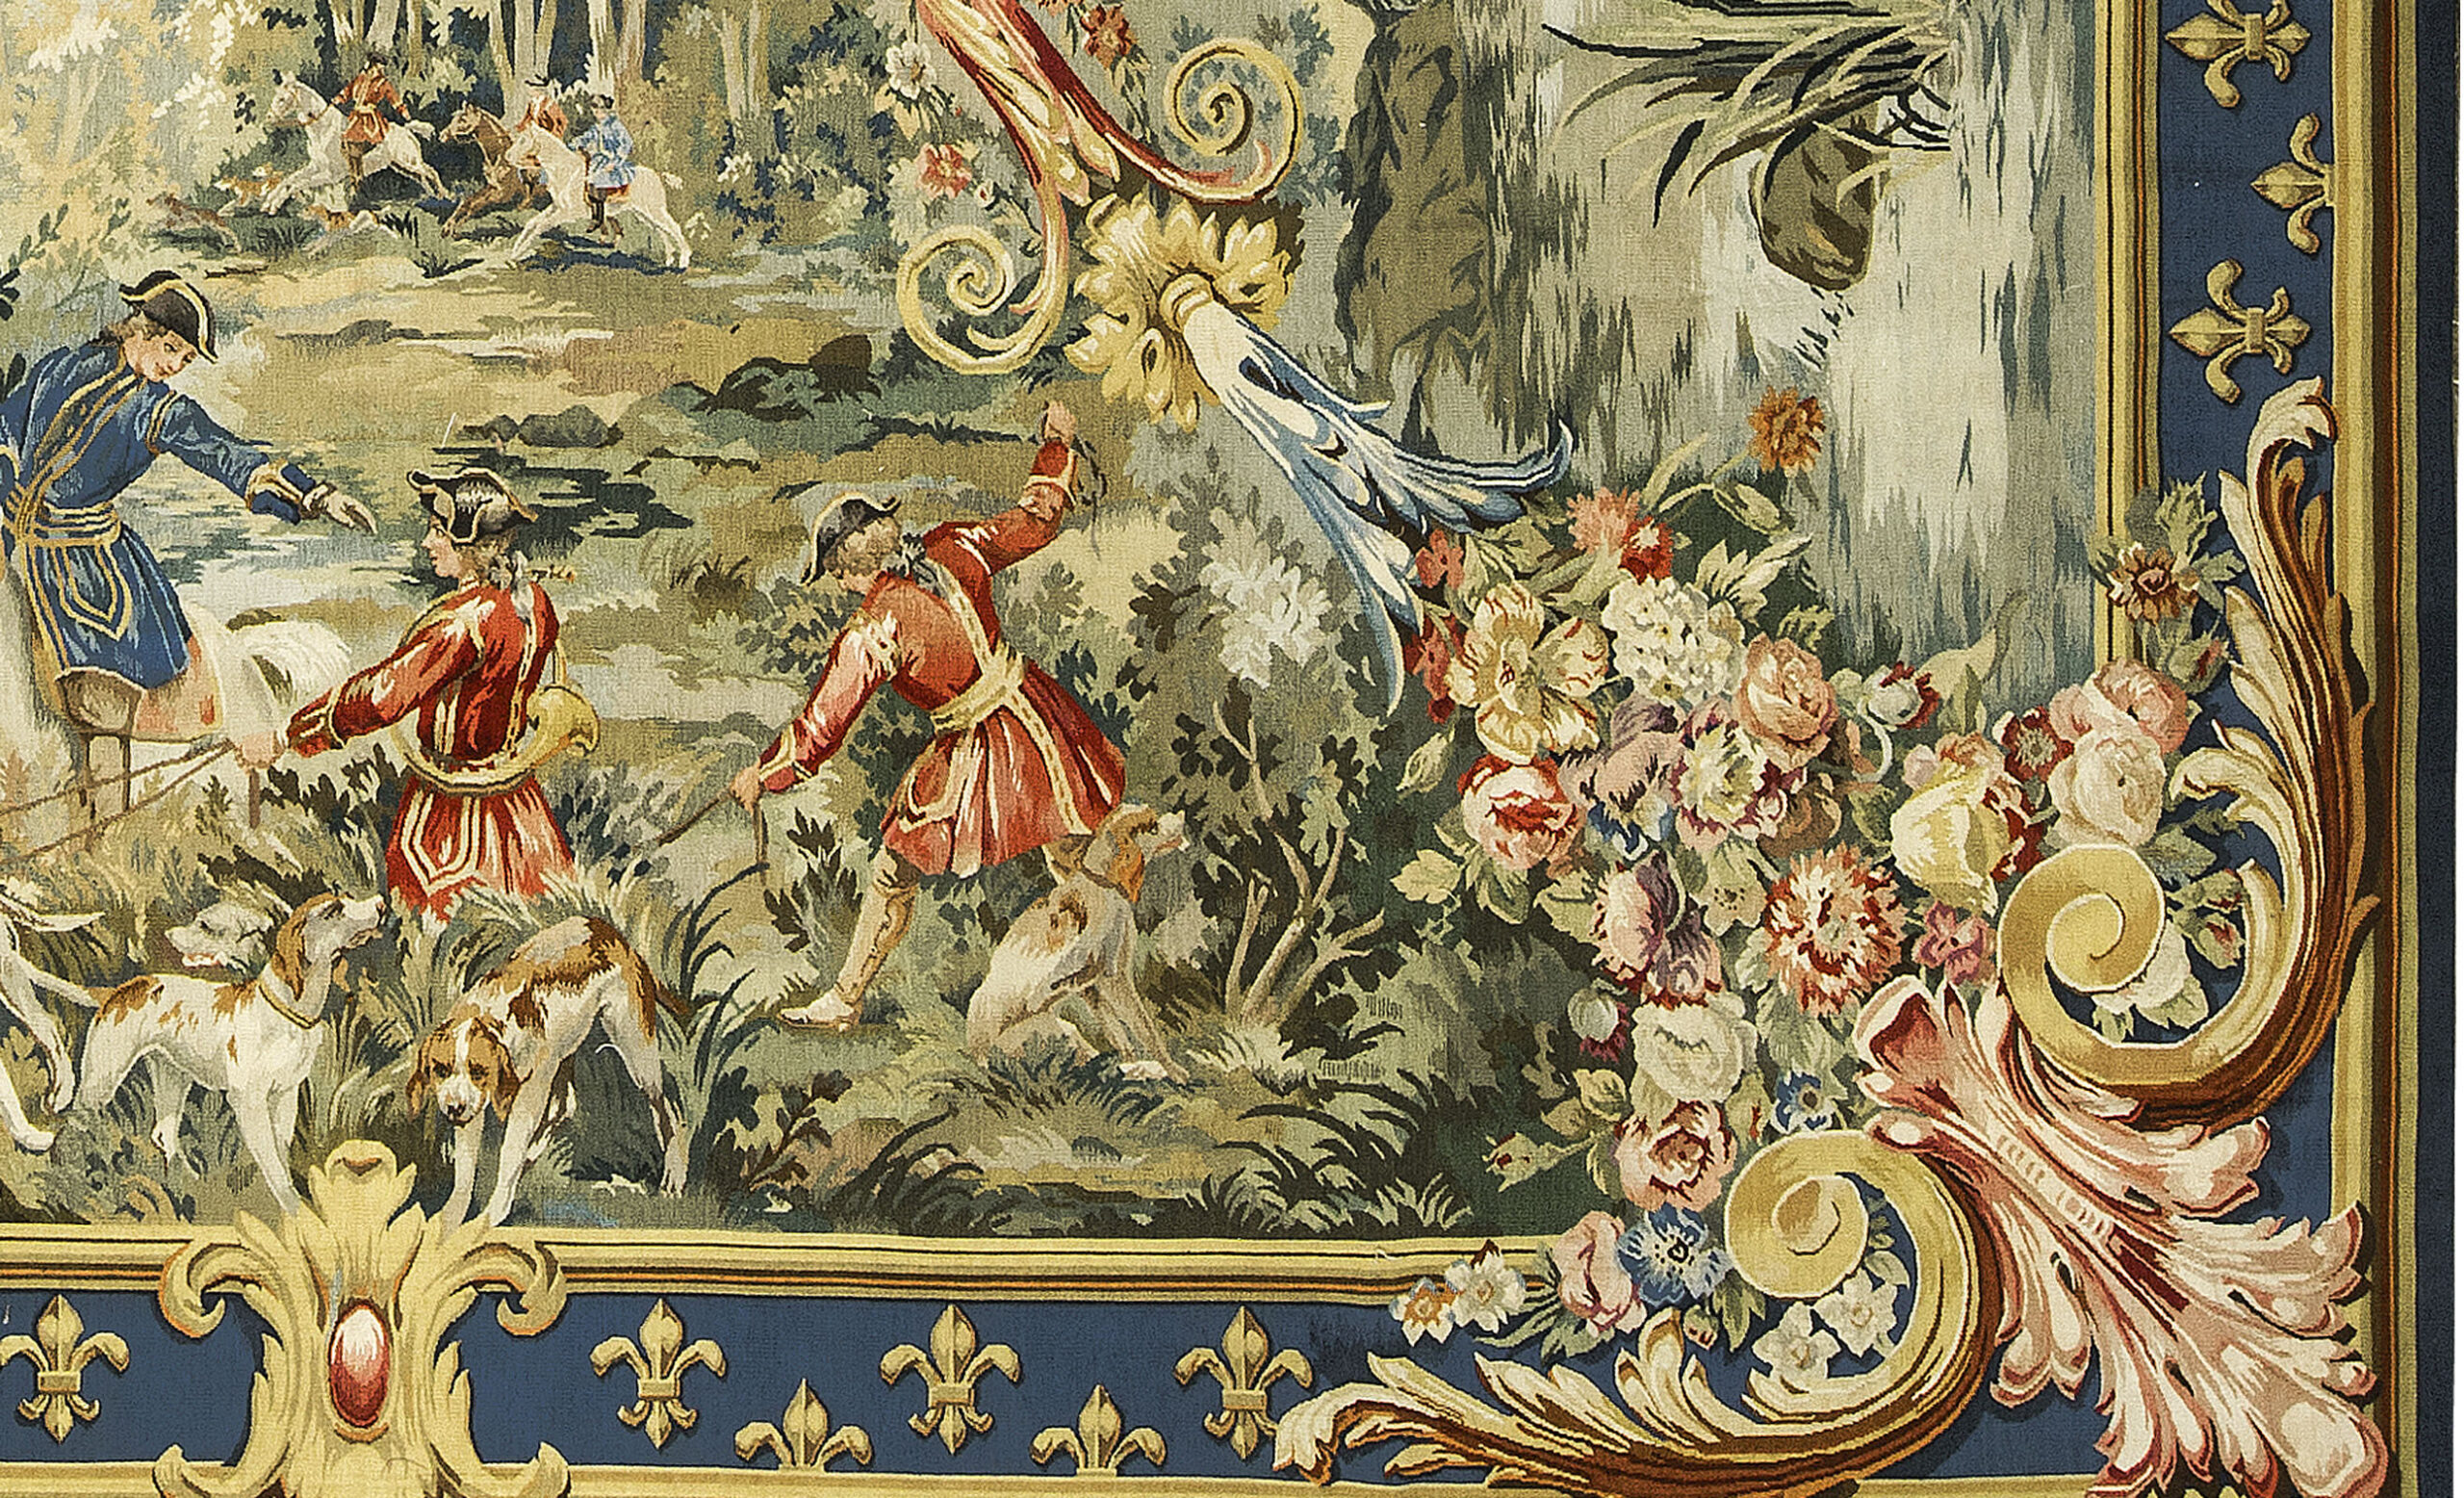 Recreation of an 18th century Flemish Hunting Scene Tapestry - Tapestries